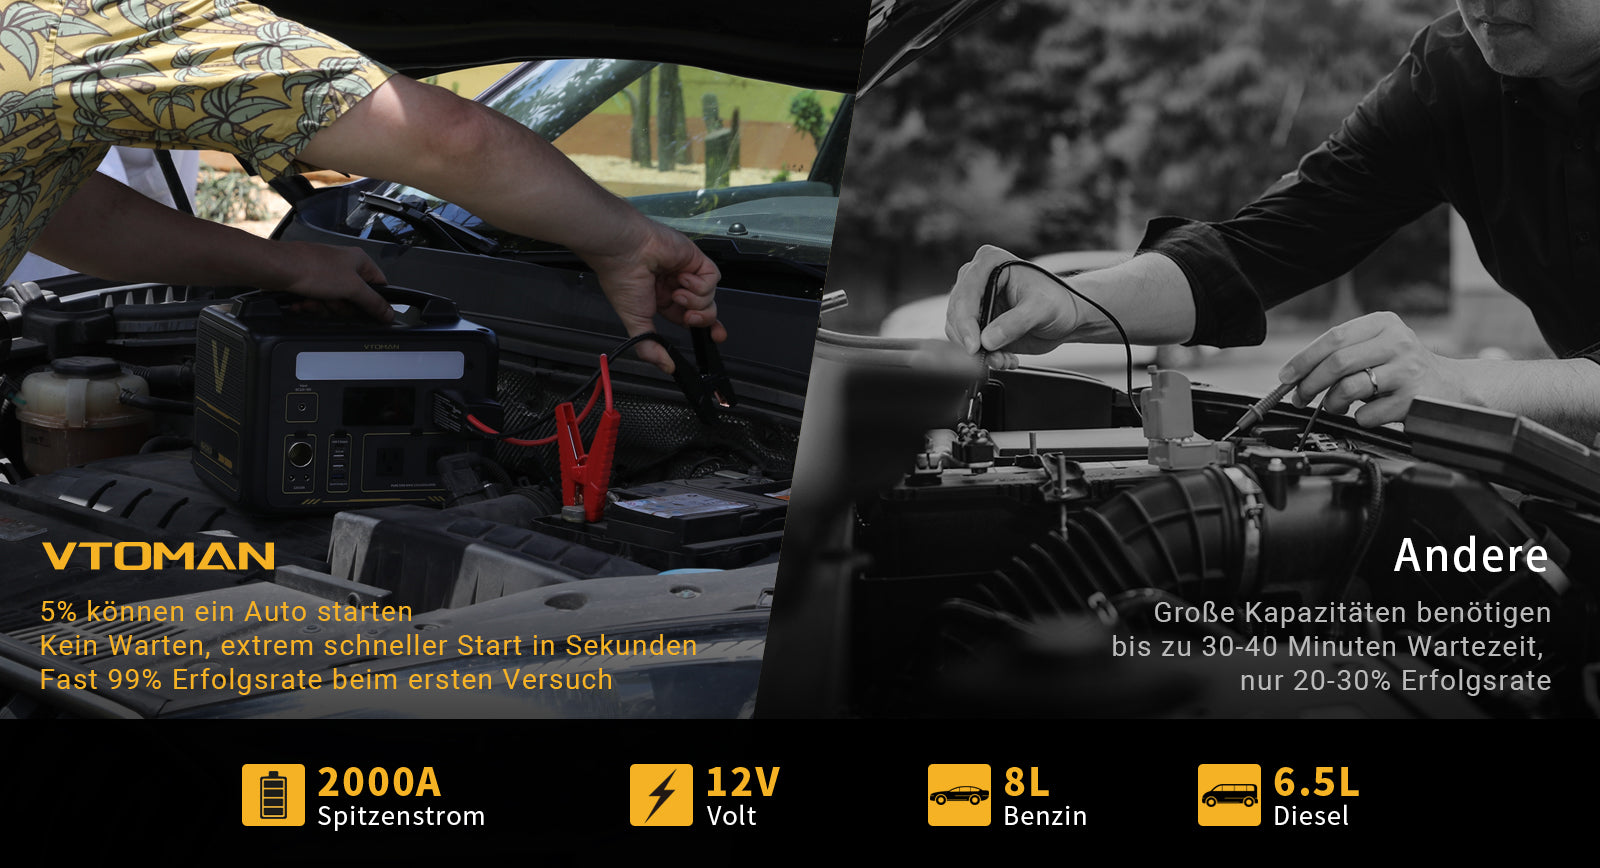 Jump 600 is built-in jump starter with 2000A peak, it’s powerful enough to start 12V car